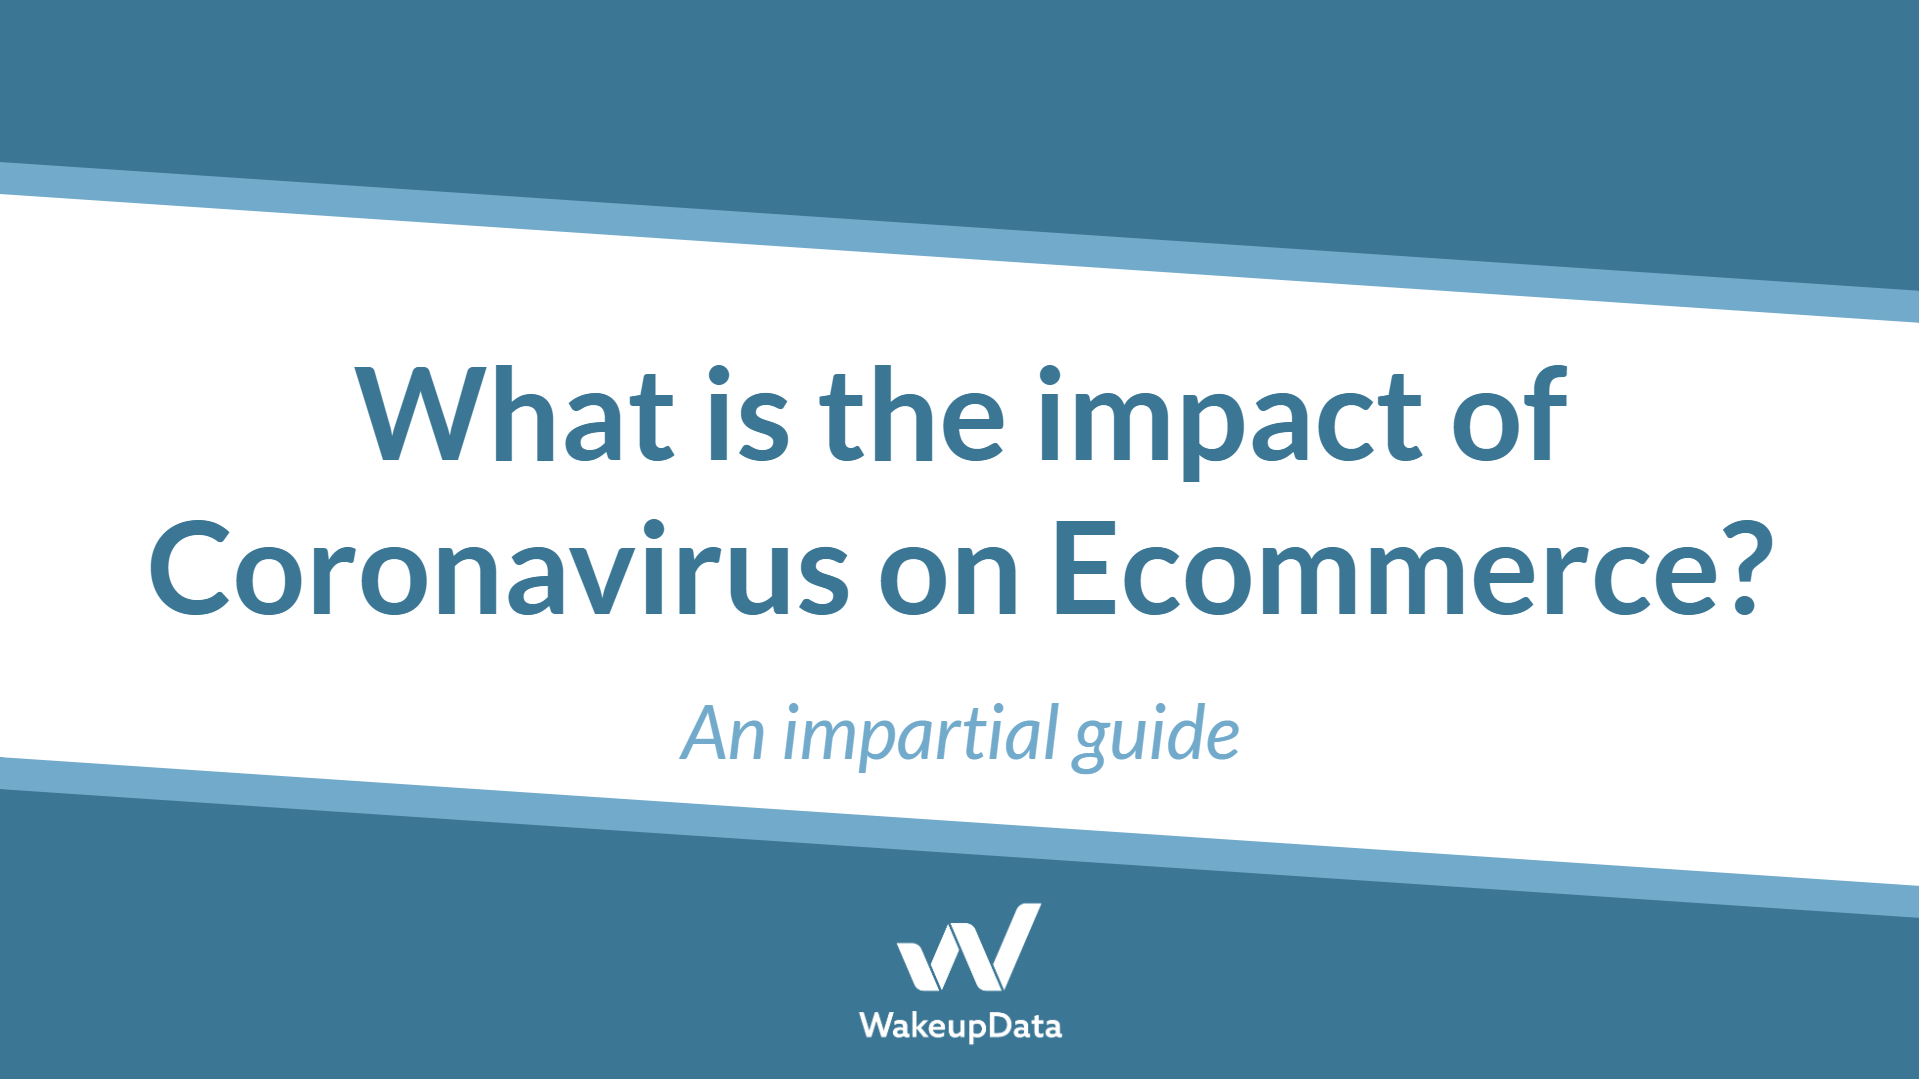 What is the impact of Coronavirus on Ecommerce? An impartial guide